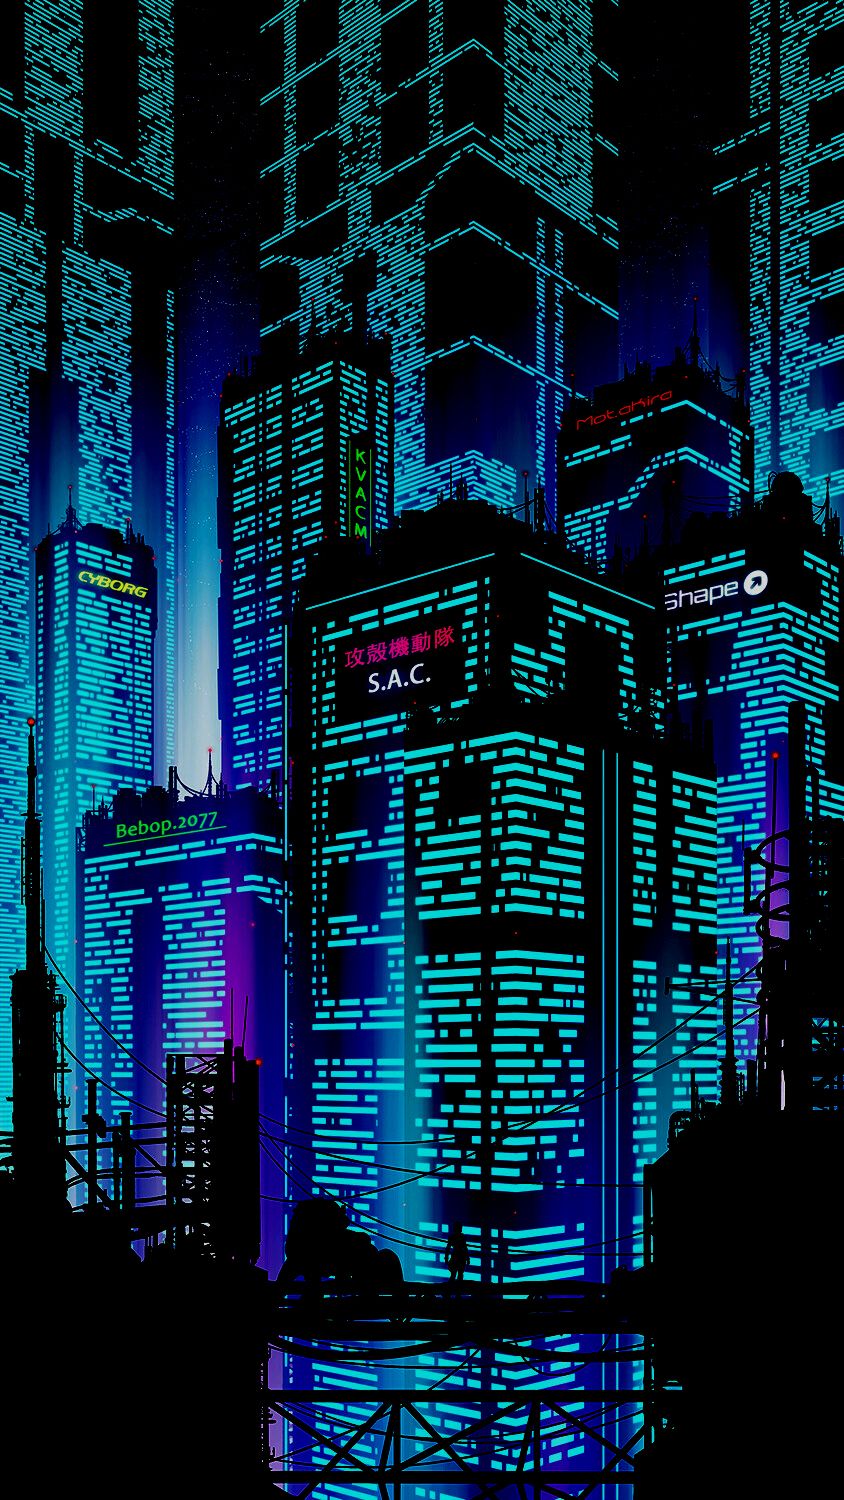 100+] Android Cyberpunk 2077 Backgrounds